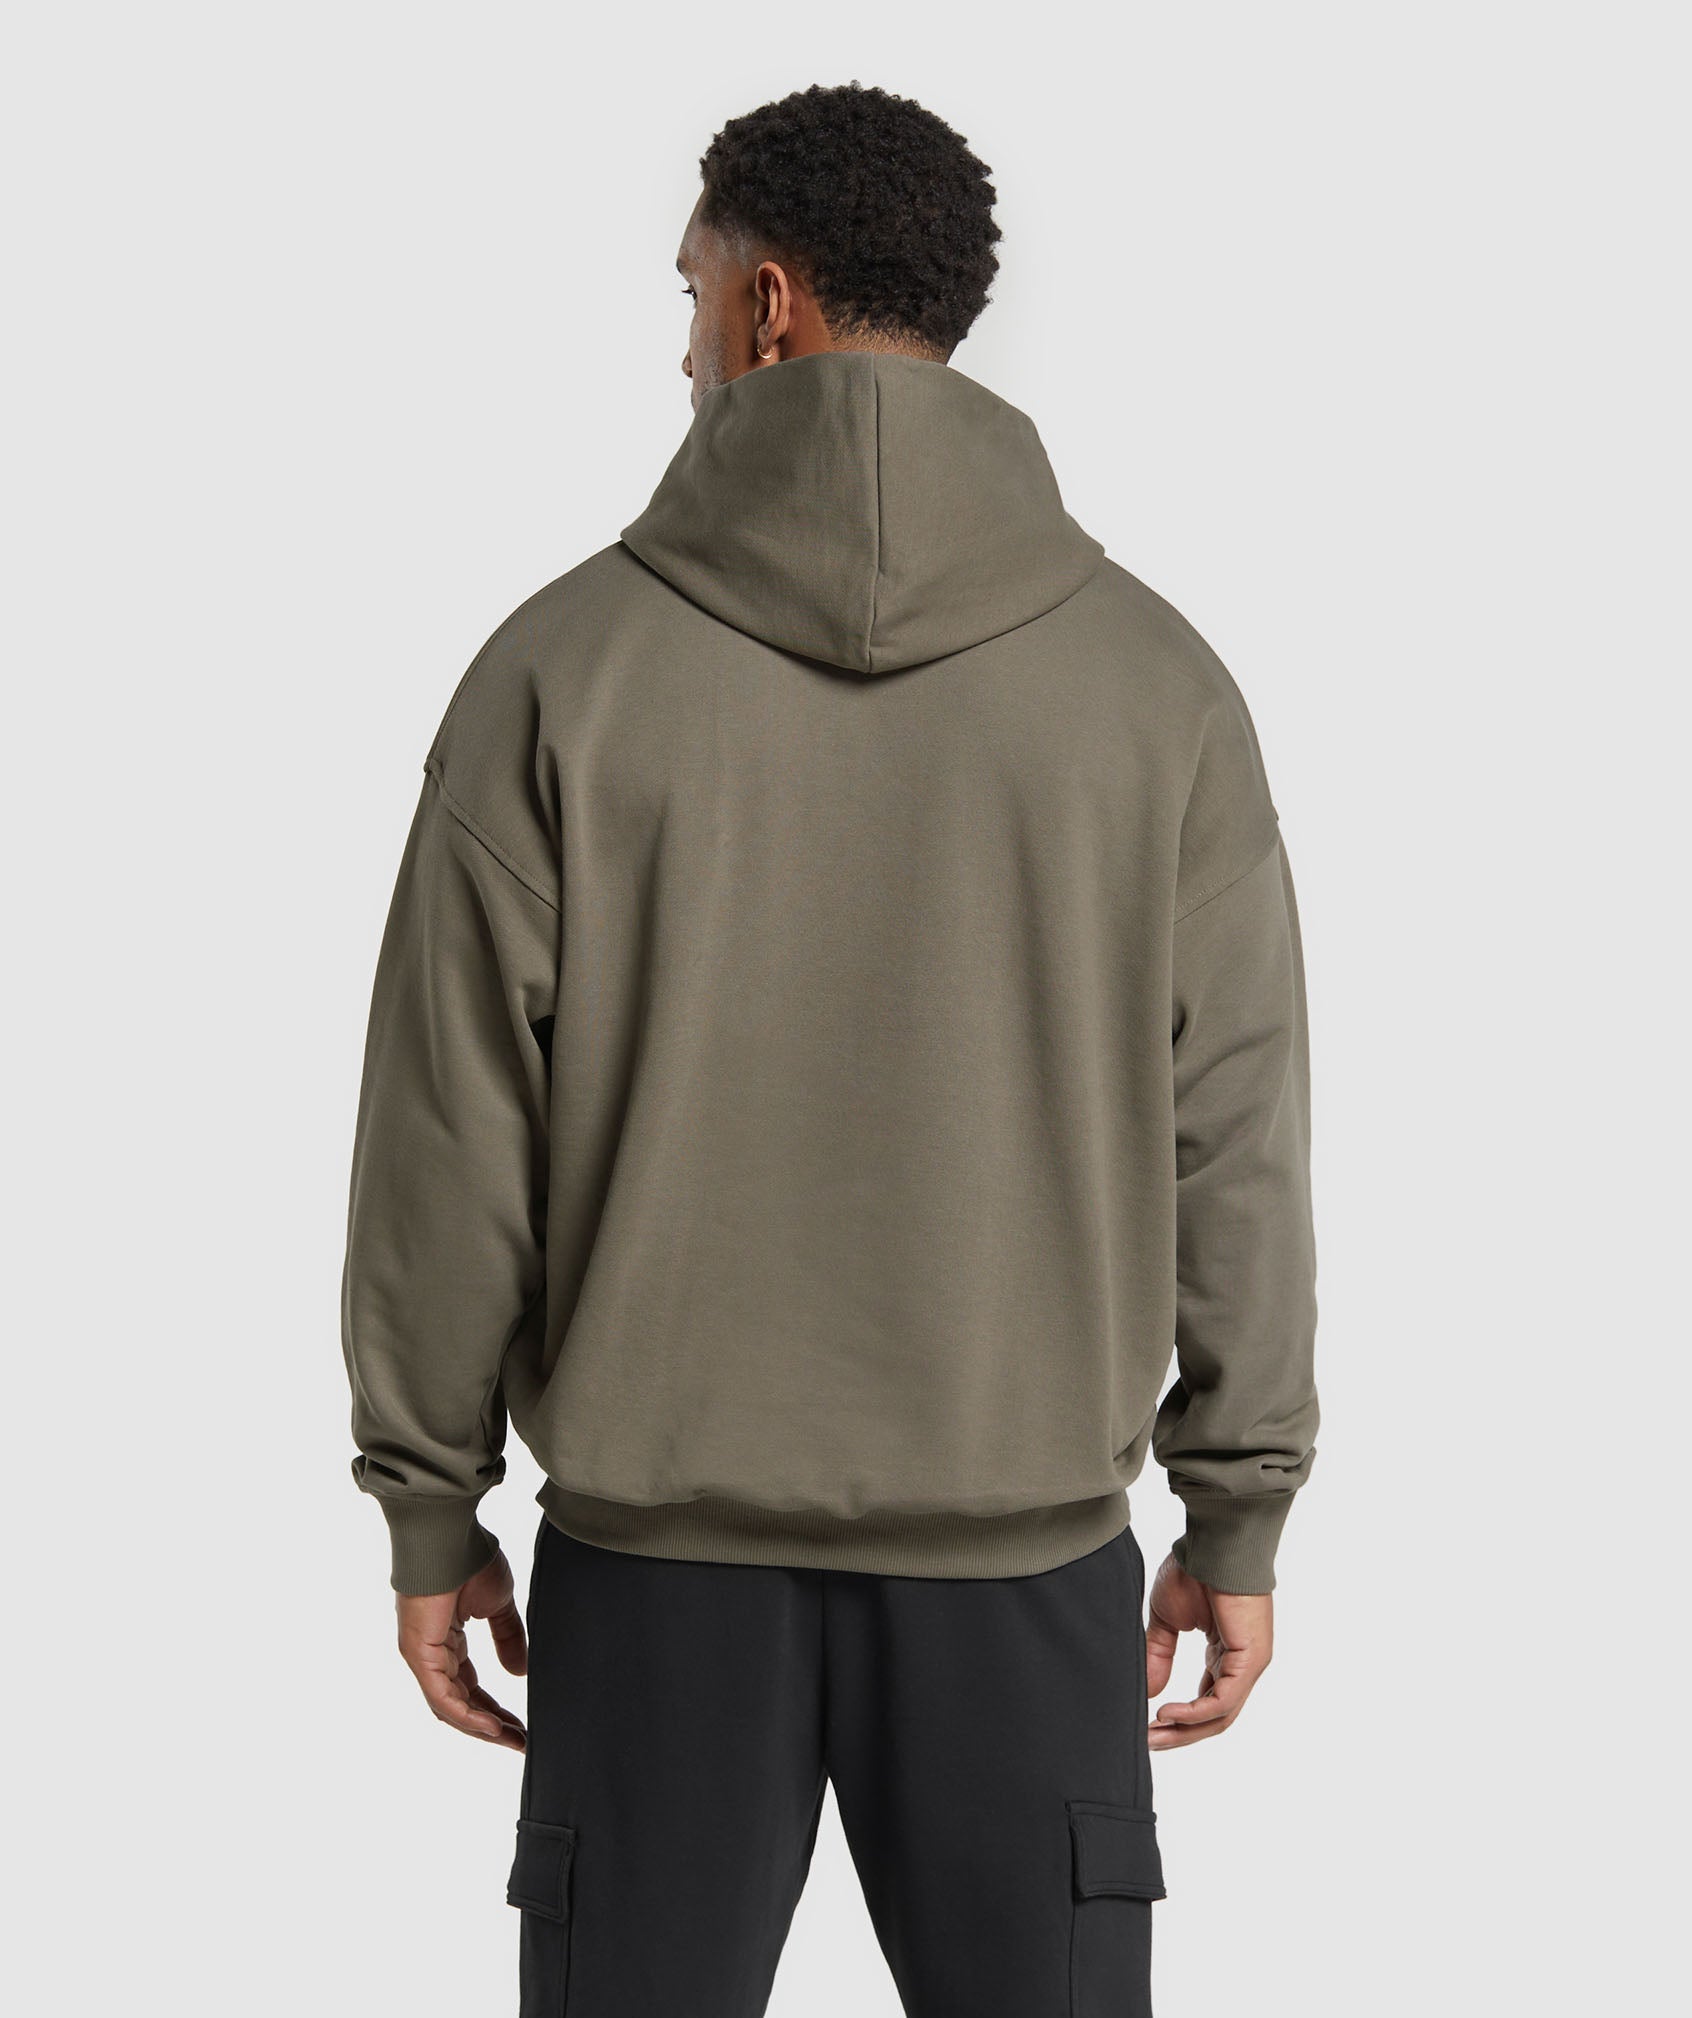 Rest Day Essentials Hoodie in Camo Brown - view 3